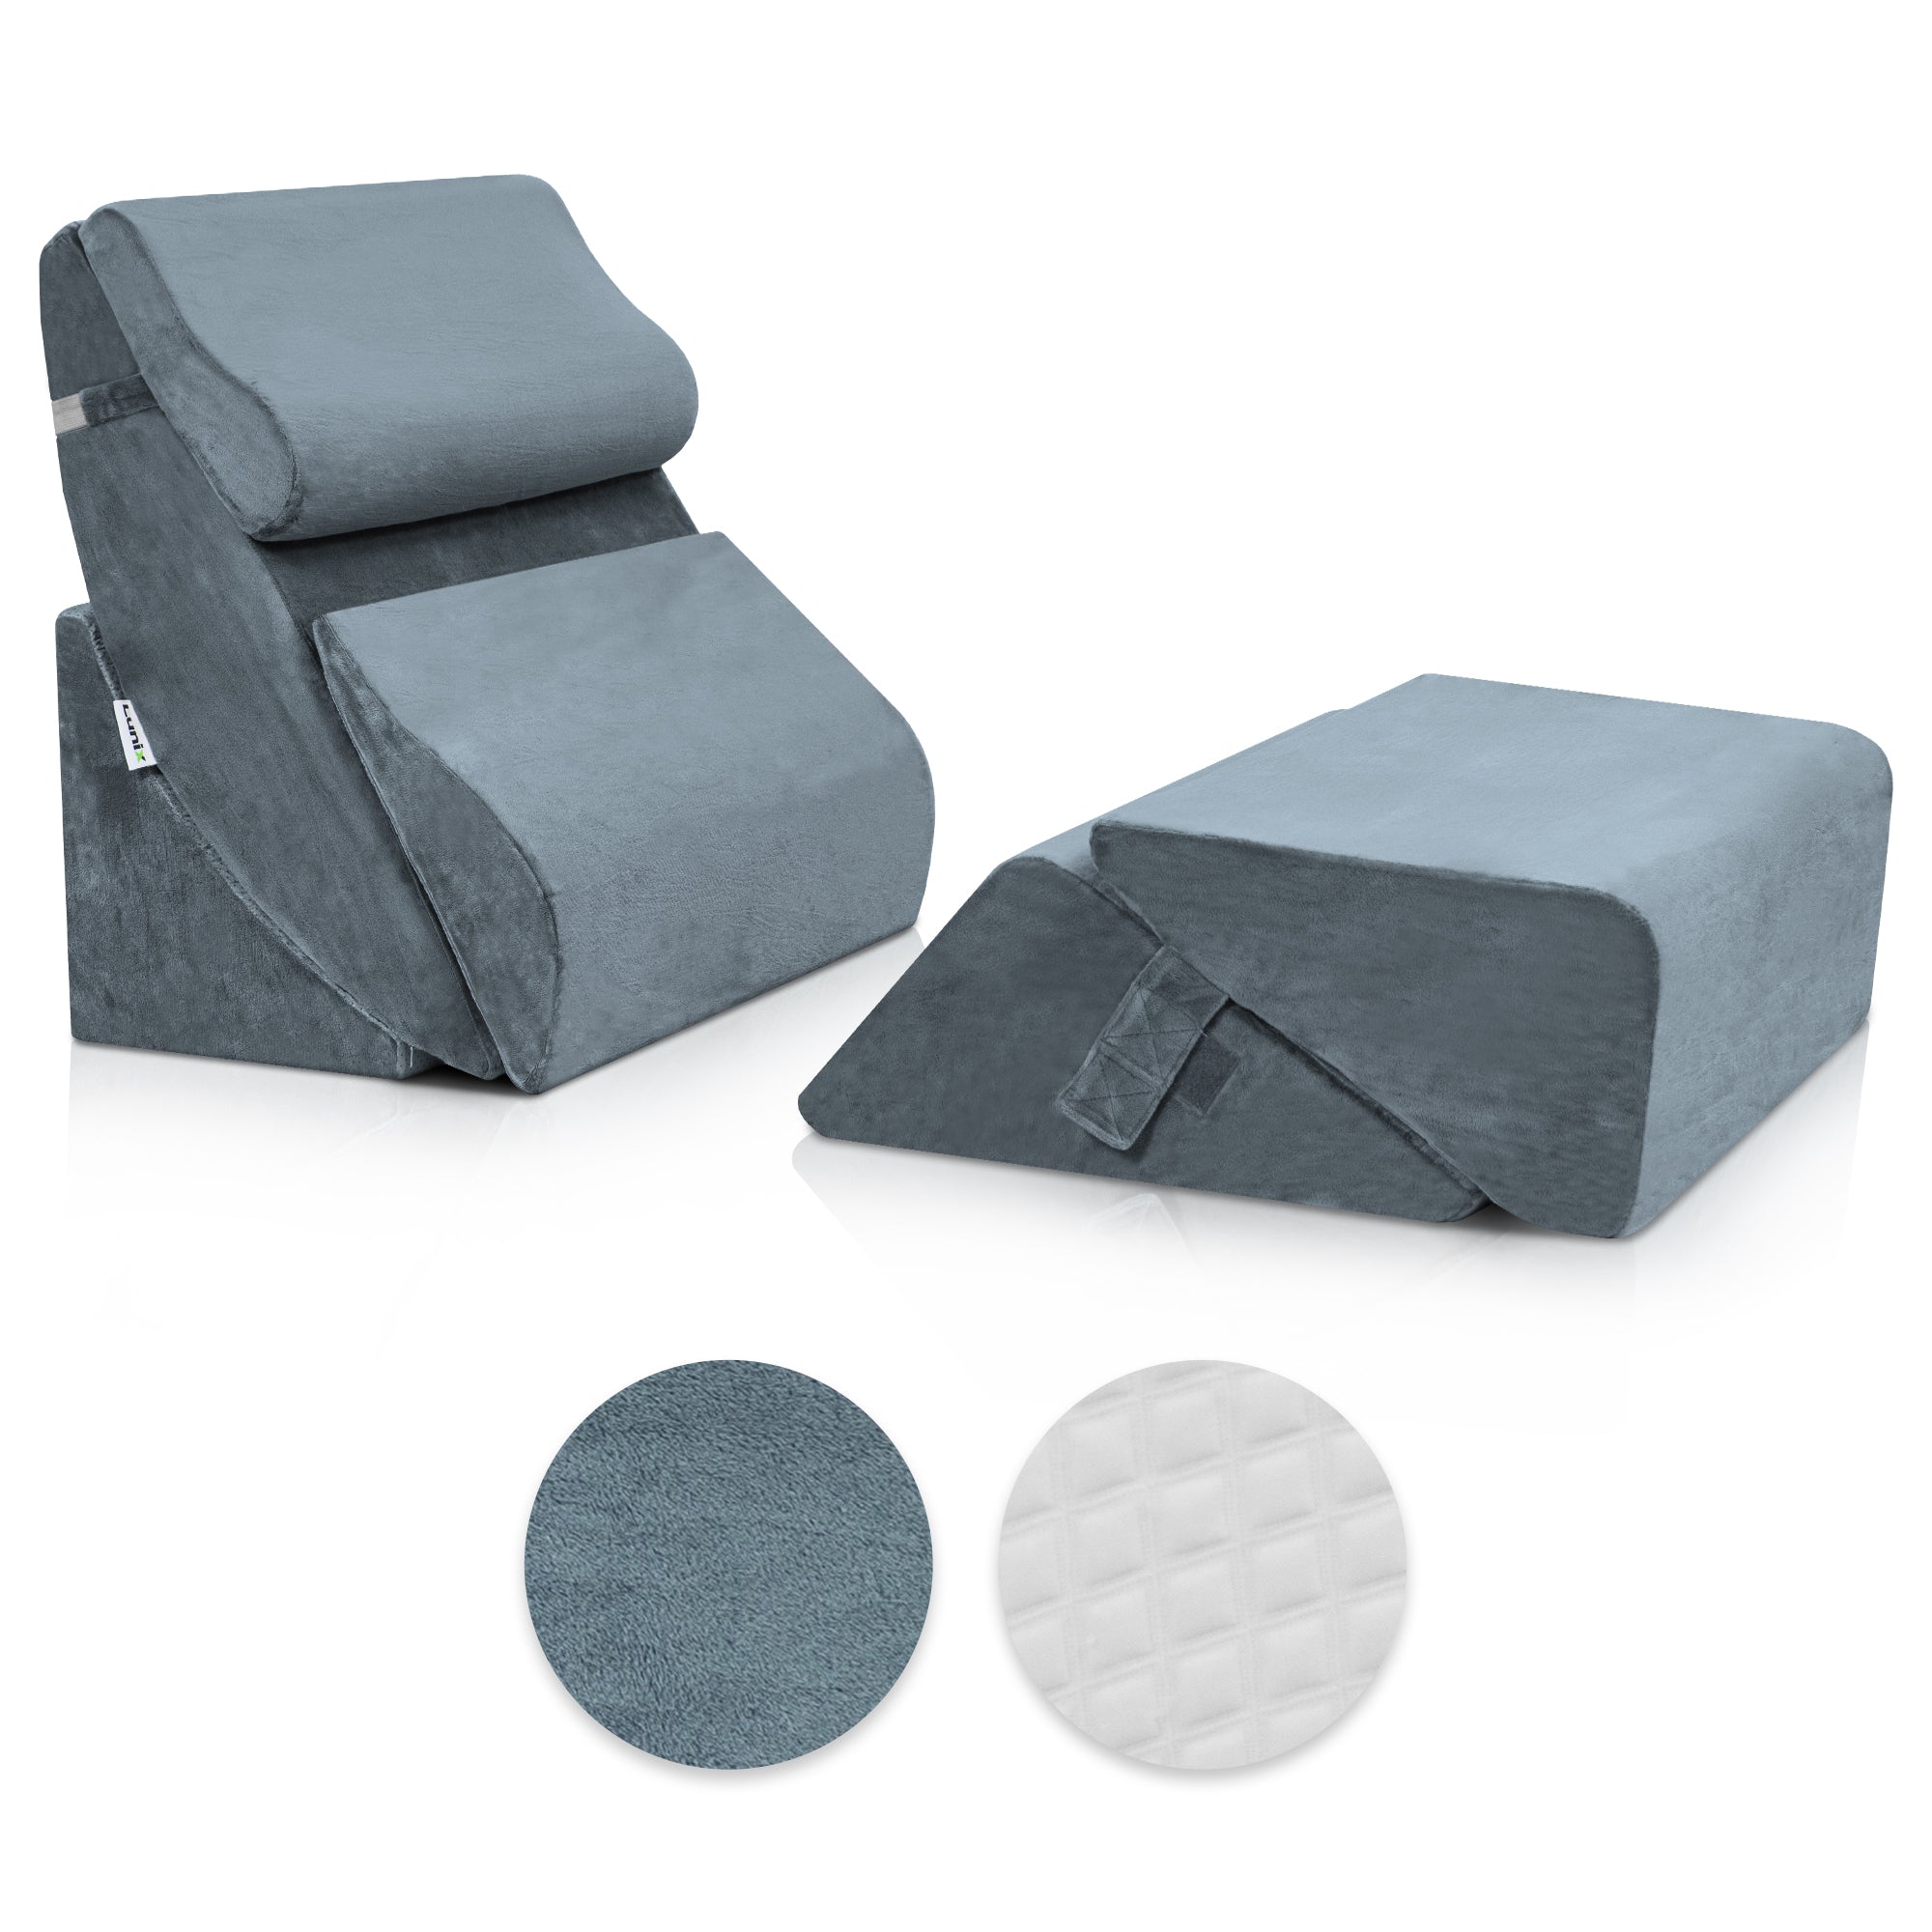 Cover Set Only for LX13, Navy Plush, Pillows and Foam not Included